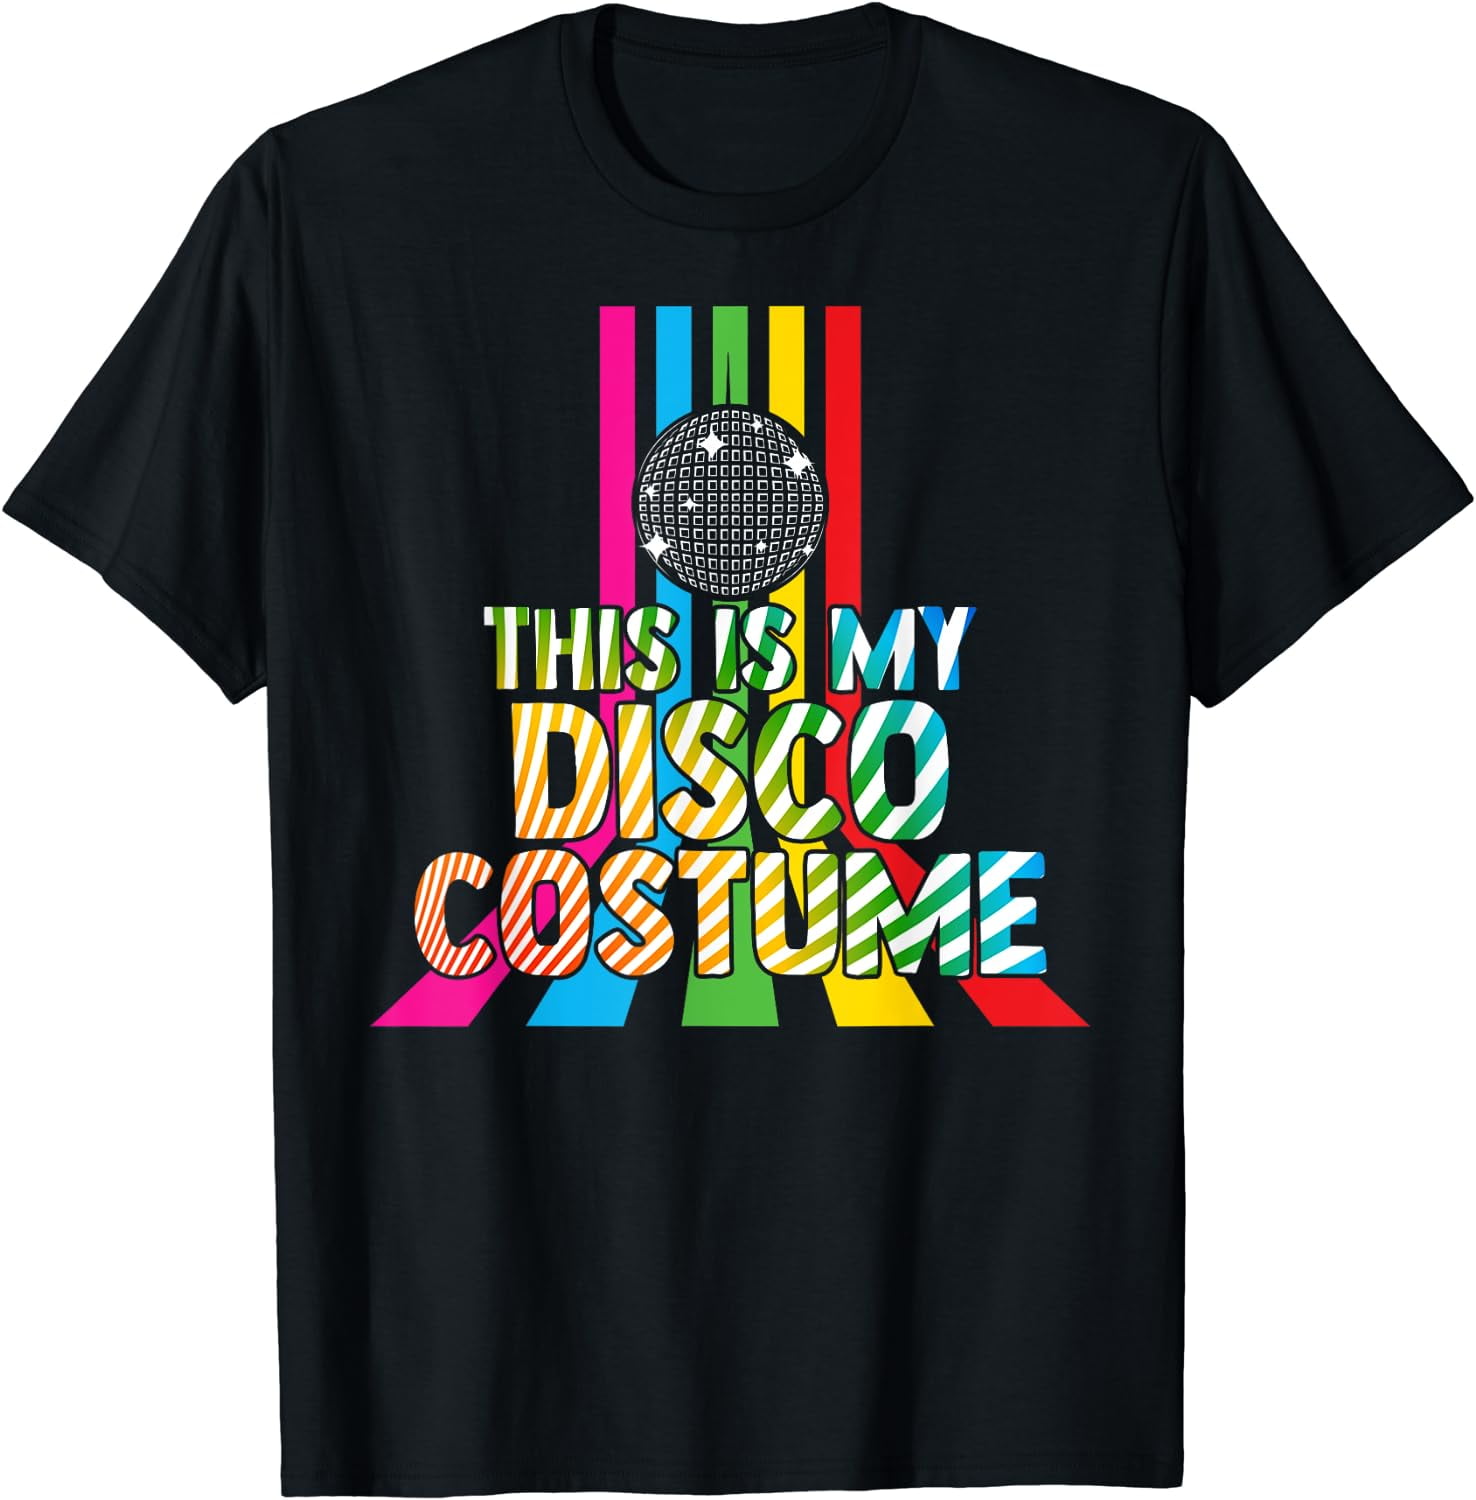 This Is My Disco Costume 80s 70s Disco Nightclub Dance Party T-Shirt ...